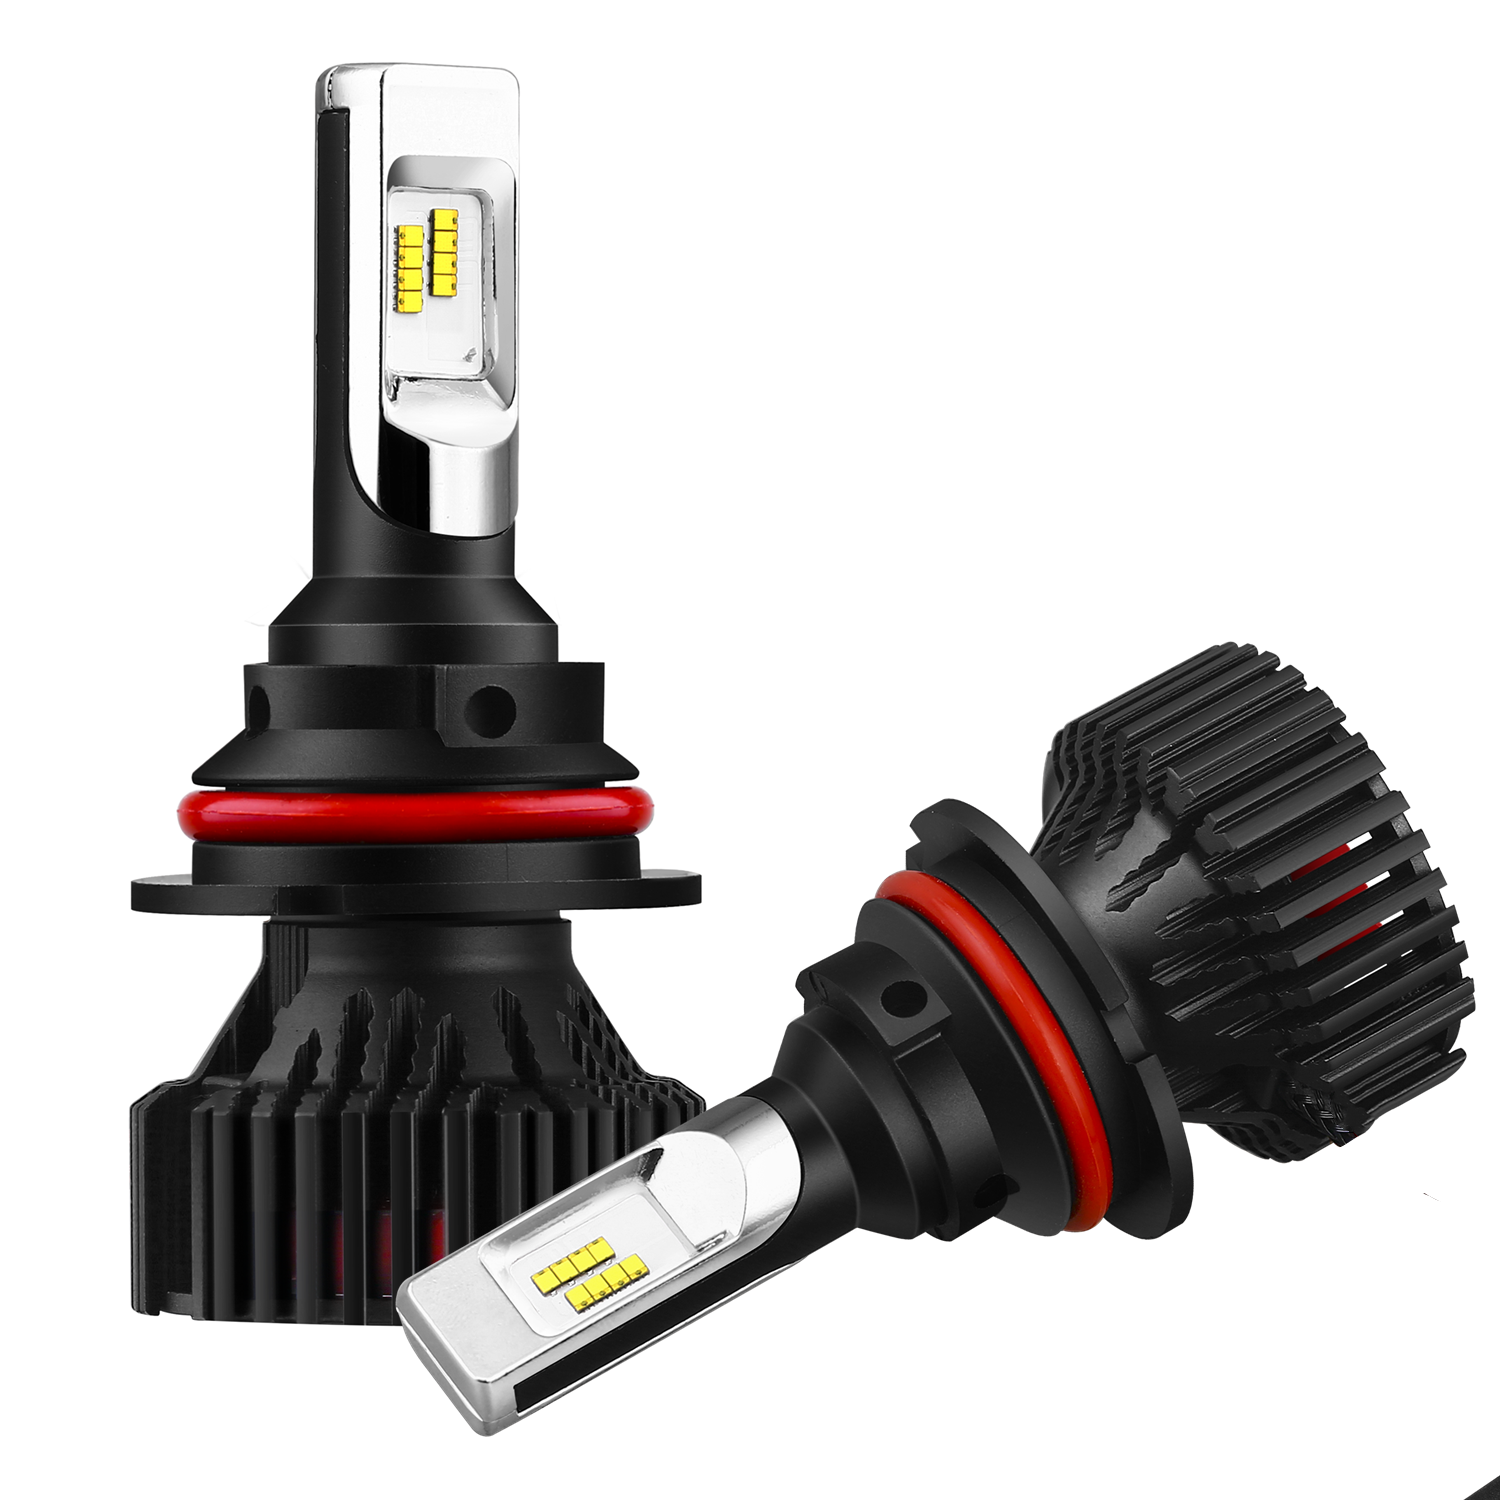 Auto LED High Low Beam Headlight Bulb for cars, trucks, motorcycles